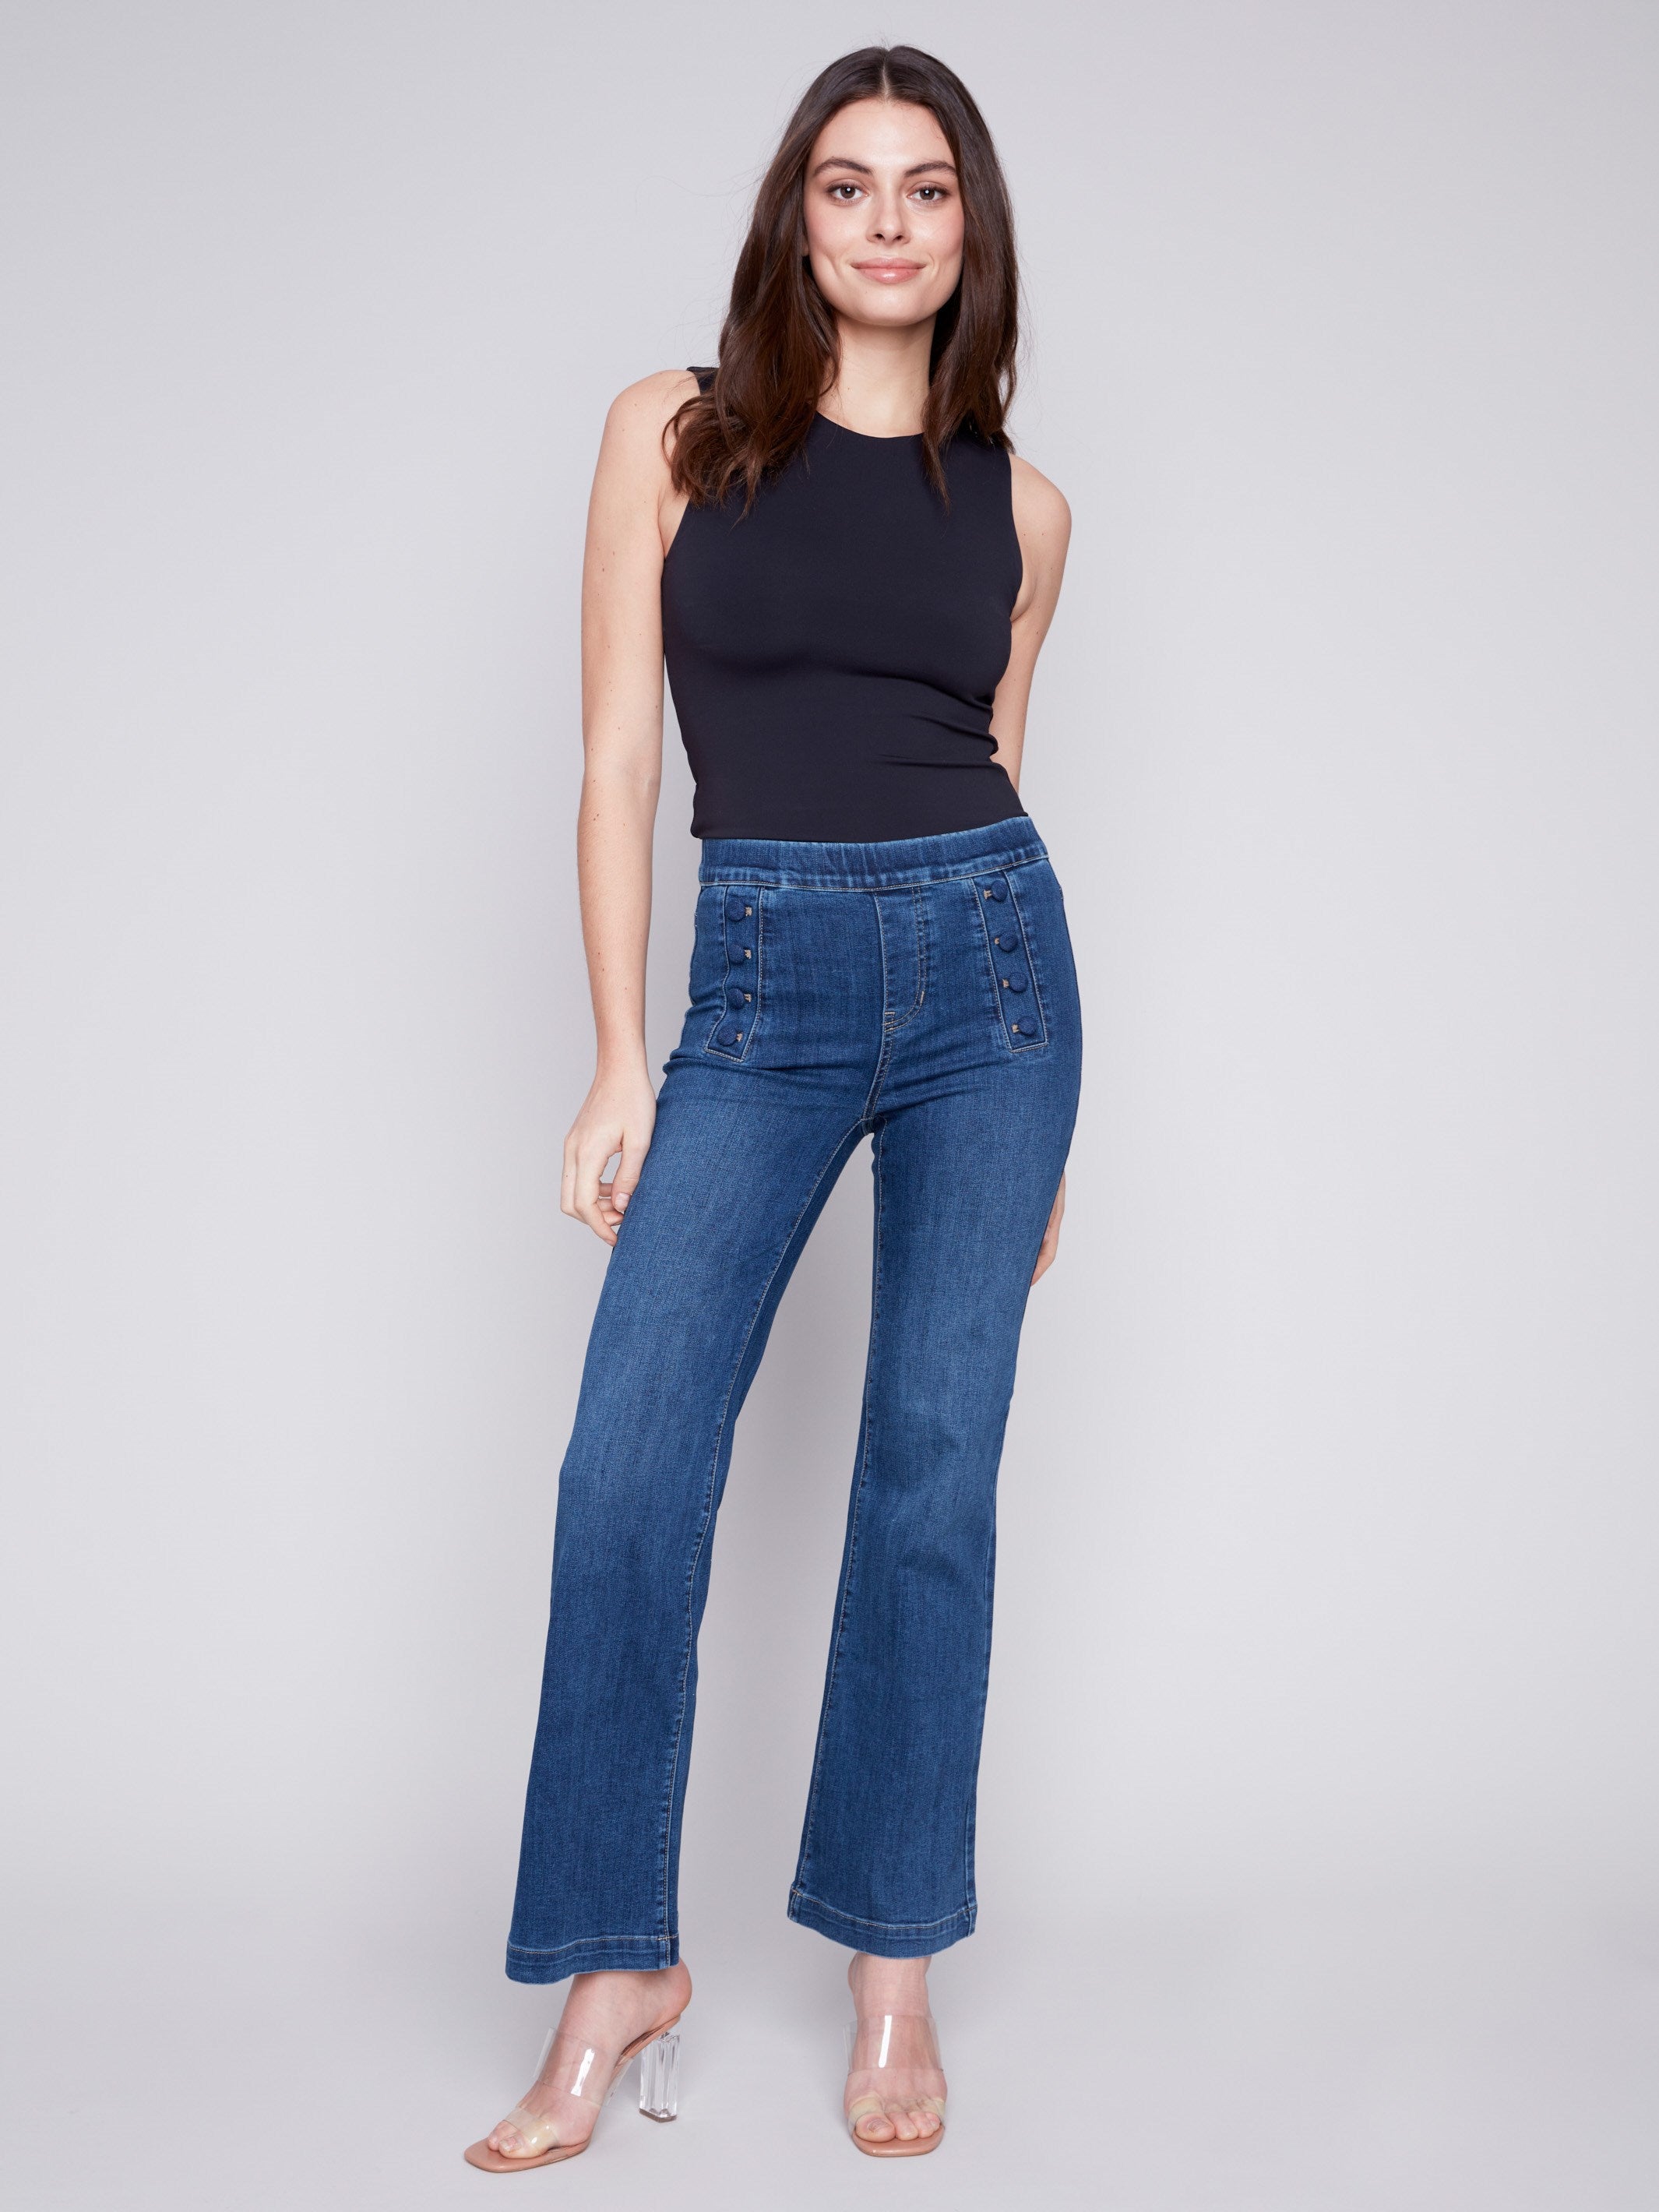 Charlie B Flare Jeans with Decorative Buttons - Indigo - Image 1